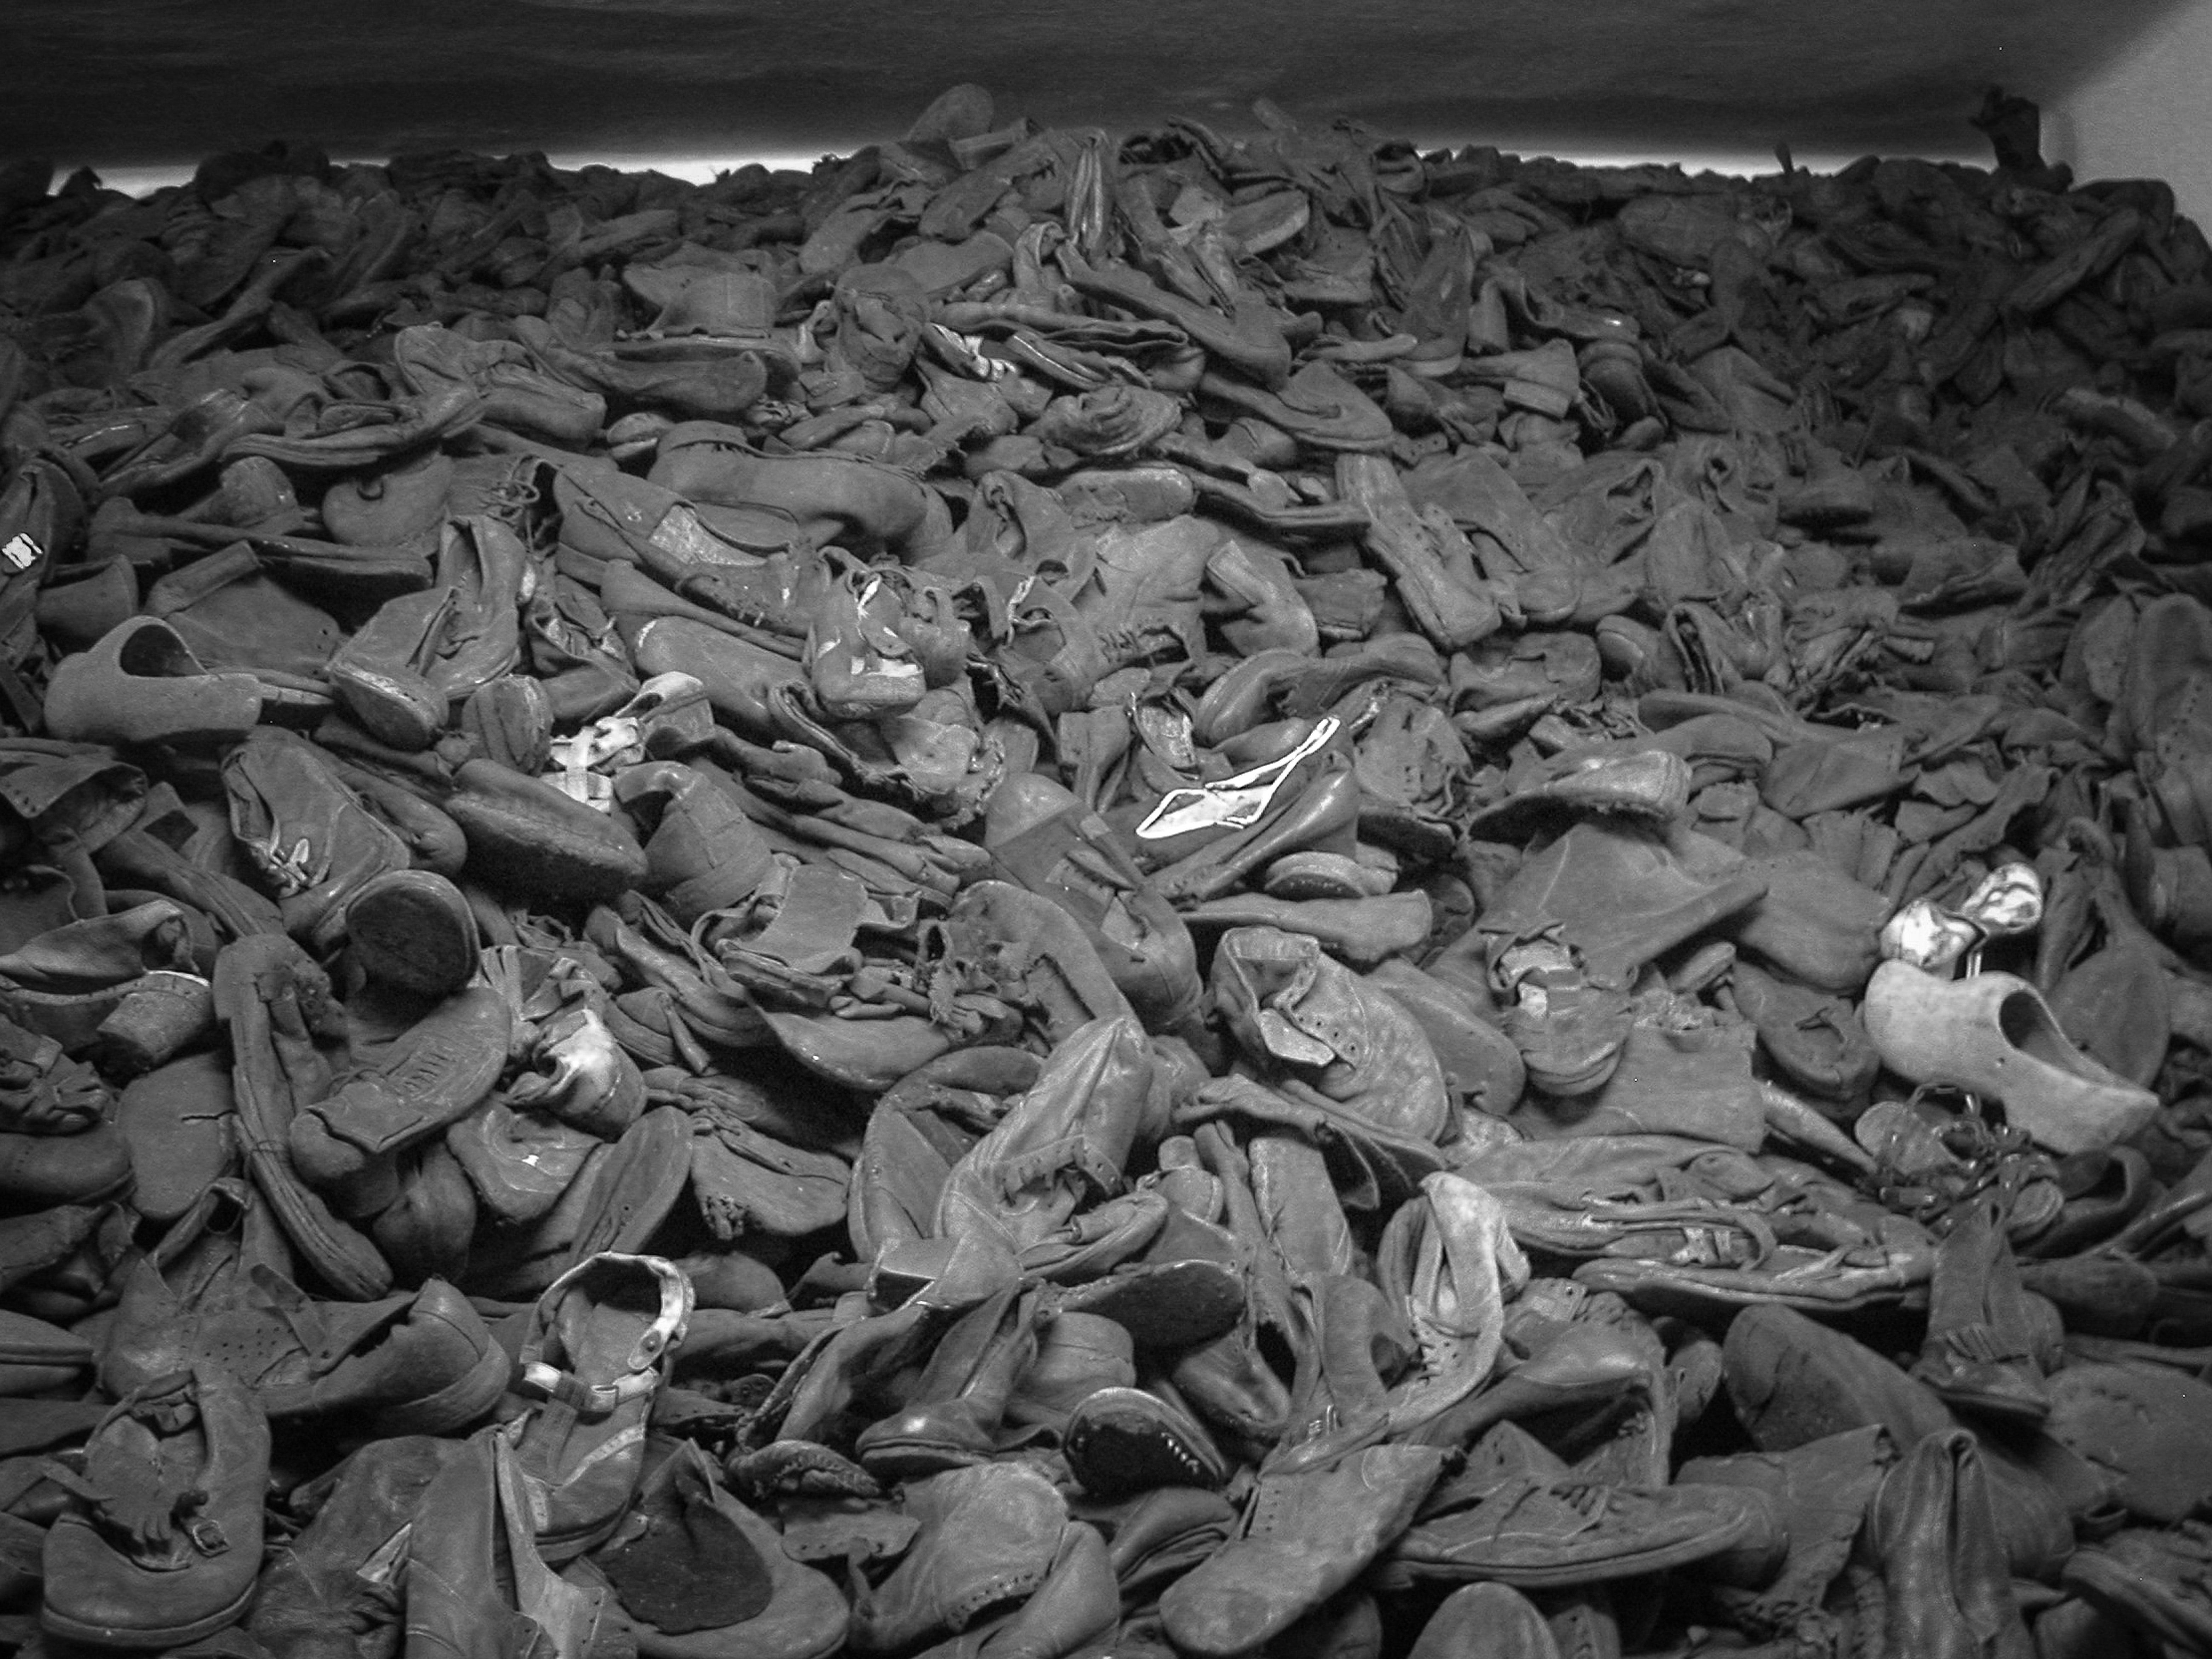 A poignant black and white photograph of a pile of shoes, remnants of those who perished in concentration camps. Symbolizing loss and human tragedy, the image serves as a solemn reminder of the atrocities of the past.